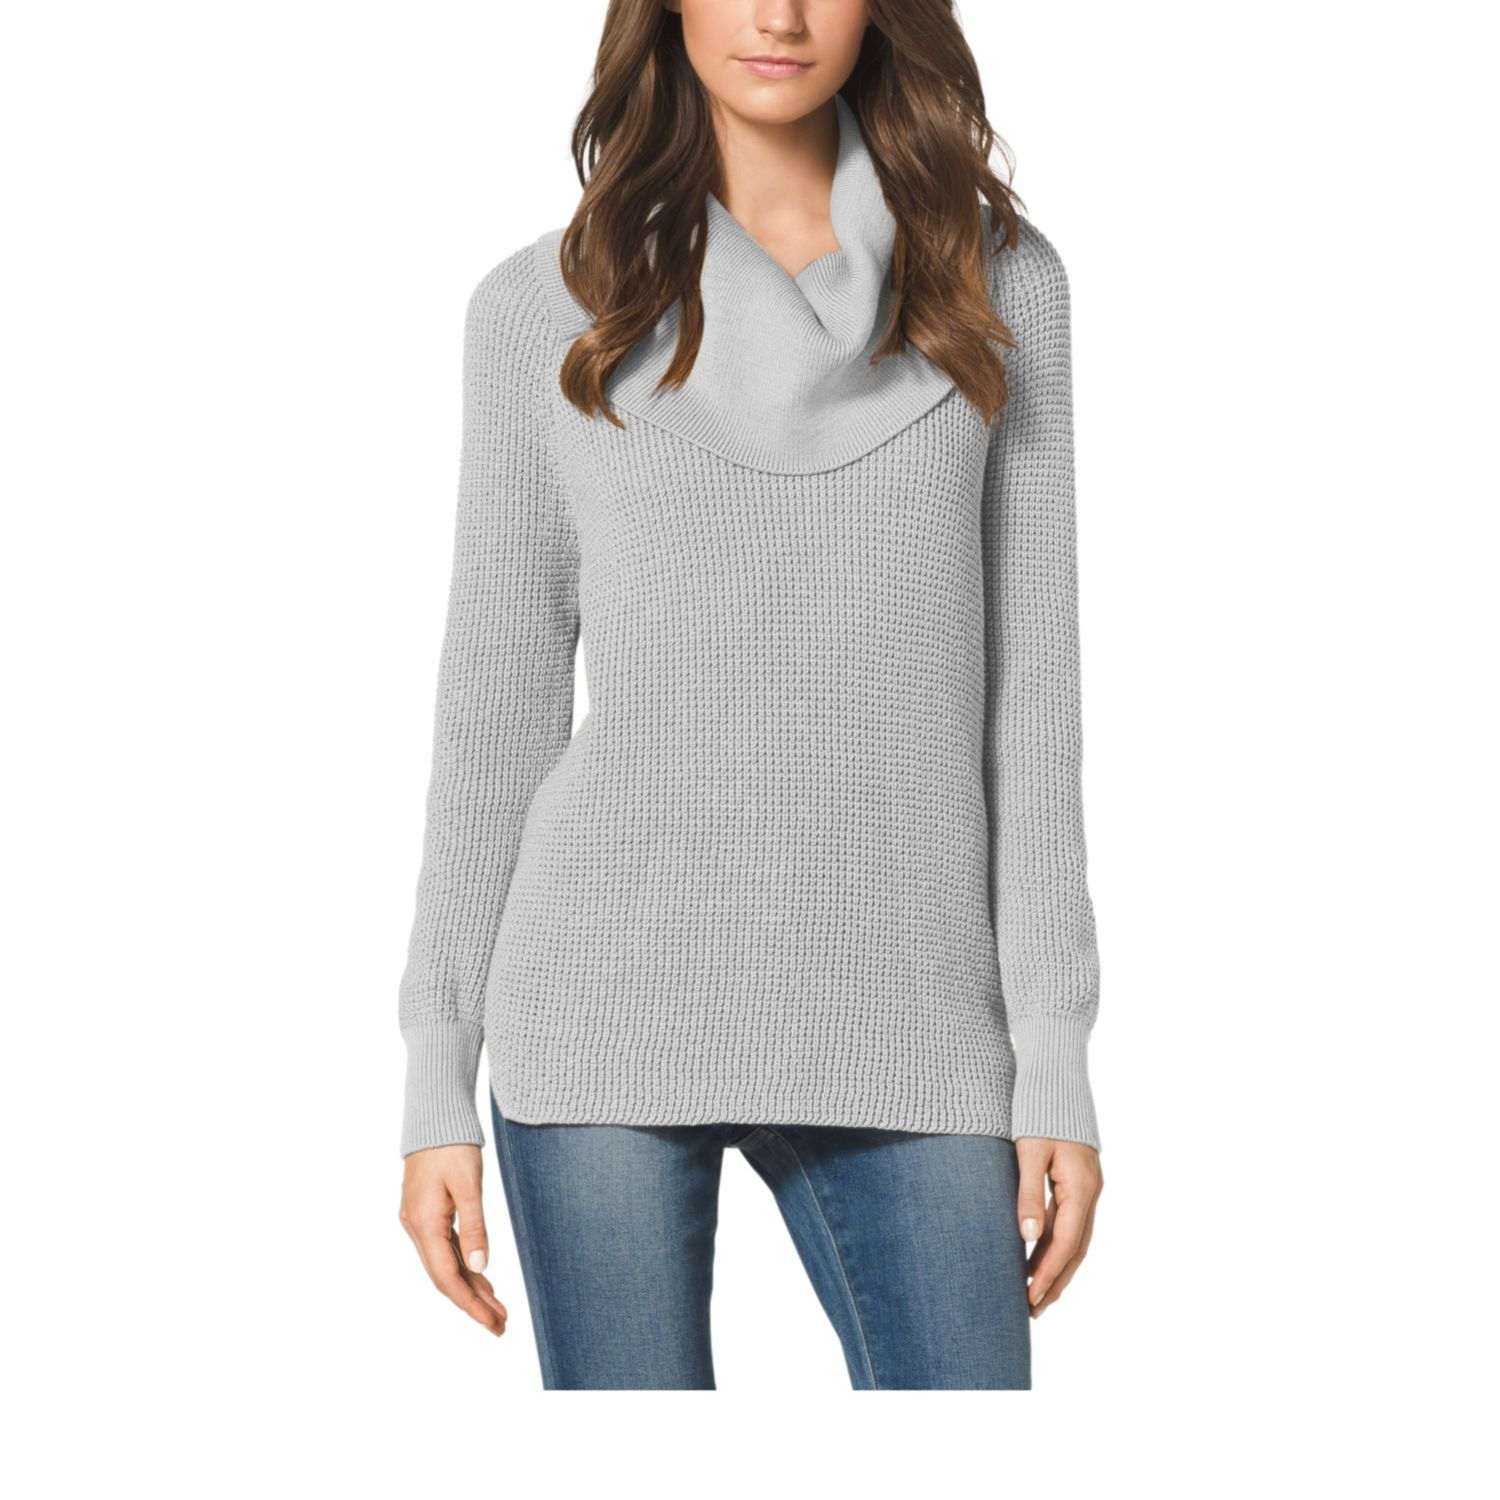 Michael kors Cowl-Neck Sweater, Petite in Gray (Pearl Heather) | Lyst